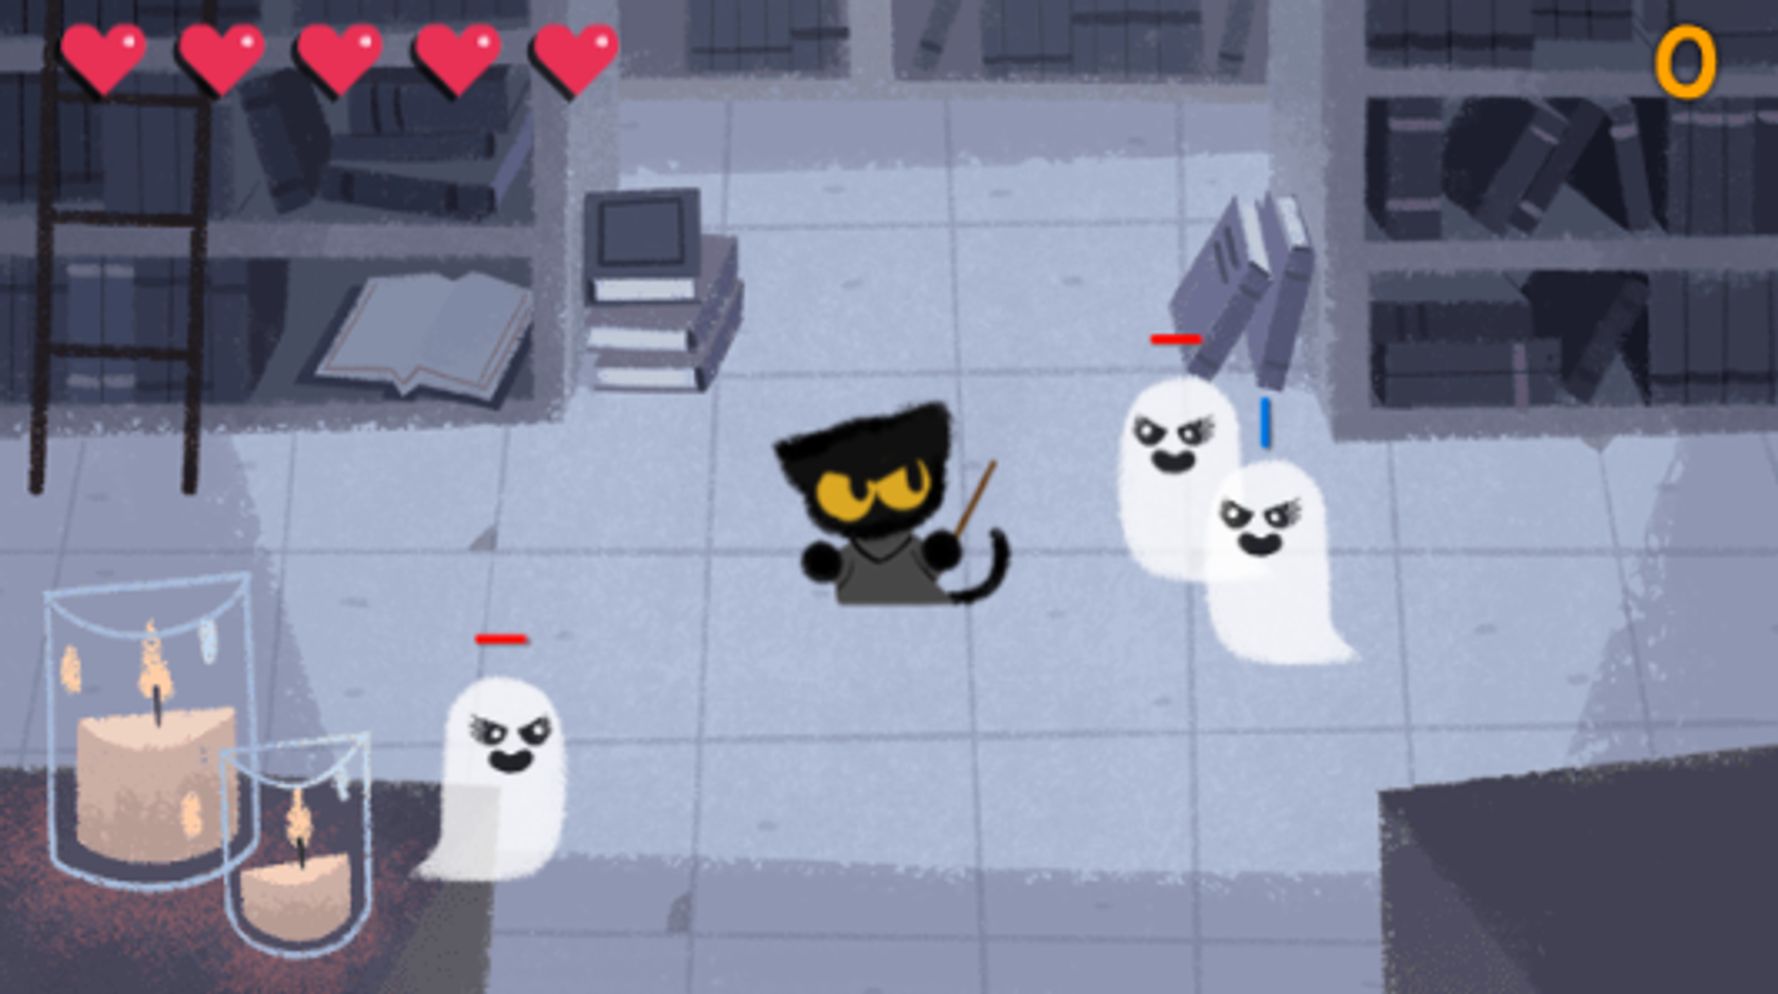 You have to play Google's addictive Halloween game